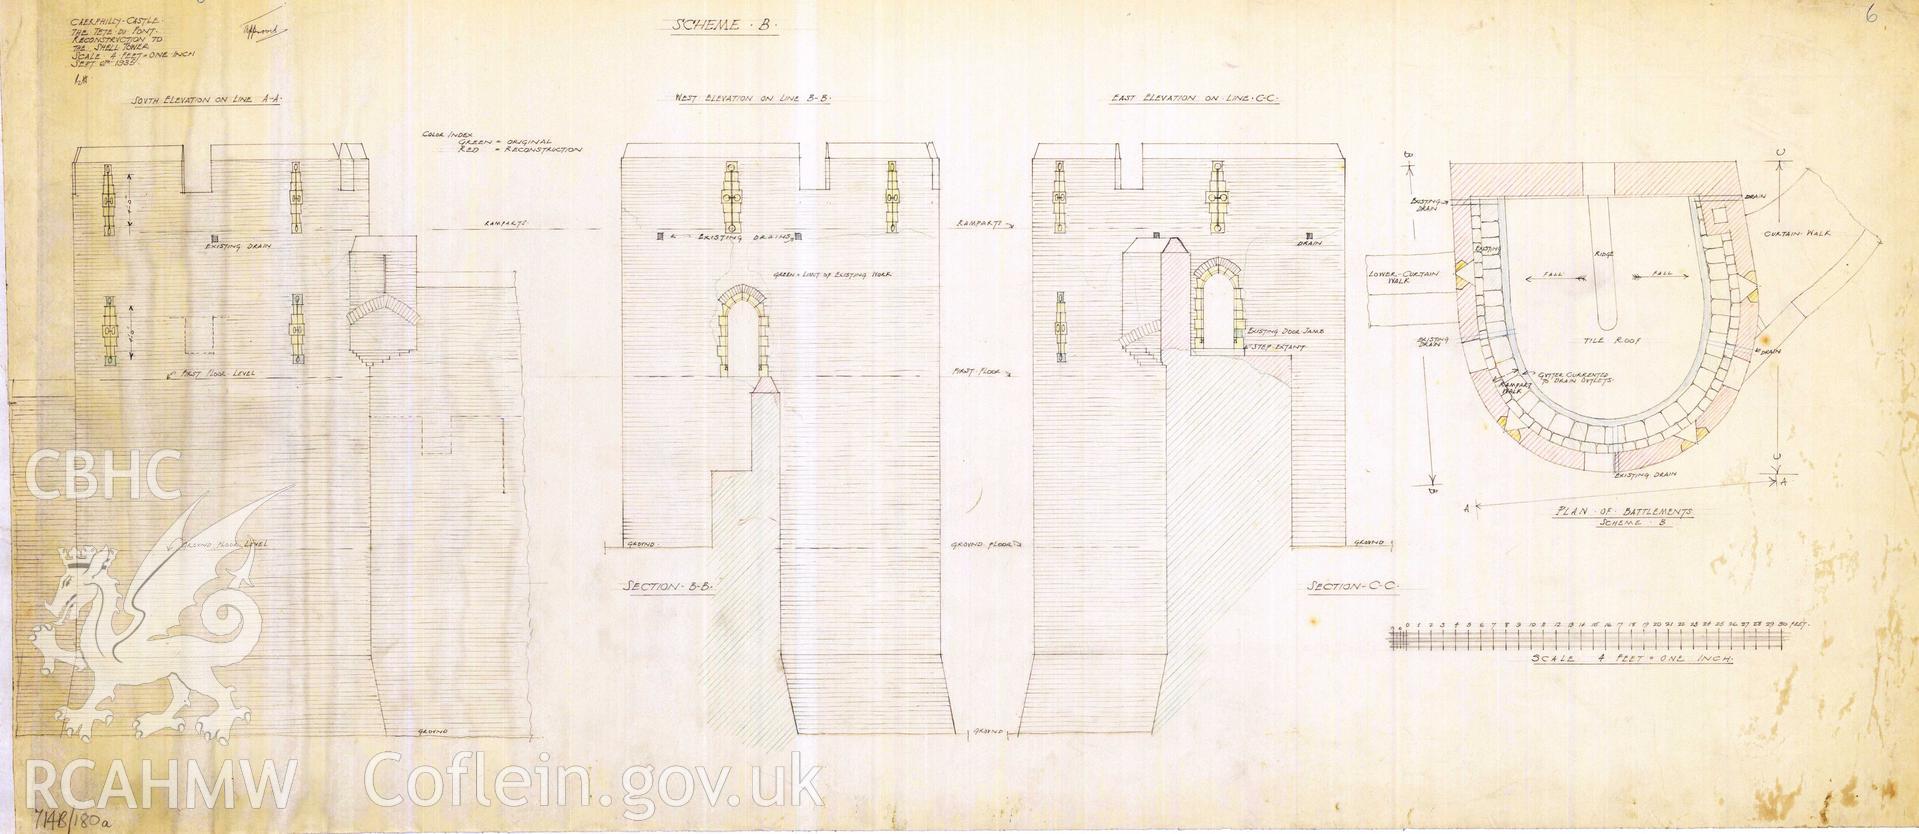 Cadw guardianship monument drawing of Caerphilly Castle. Dam S tower, elev (iv) sch B. Cadw Ref. No:714B/180a. Scale 1:48.